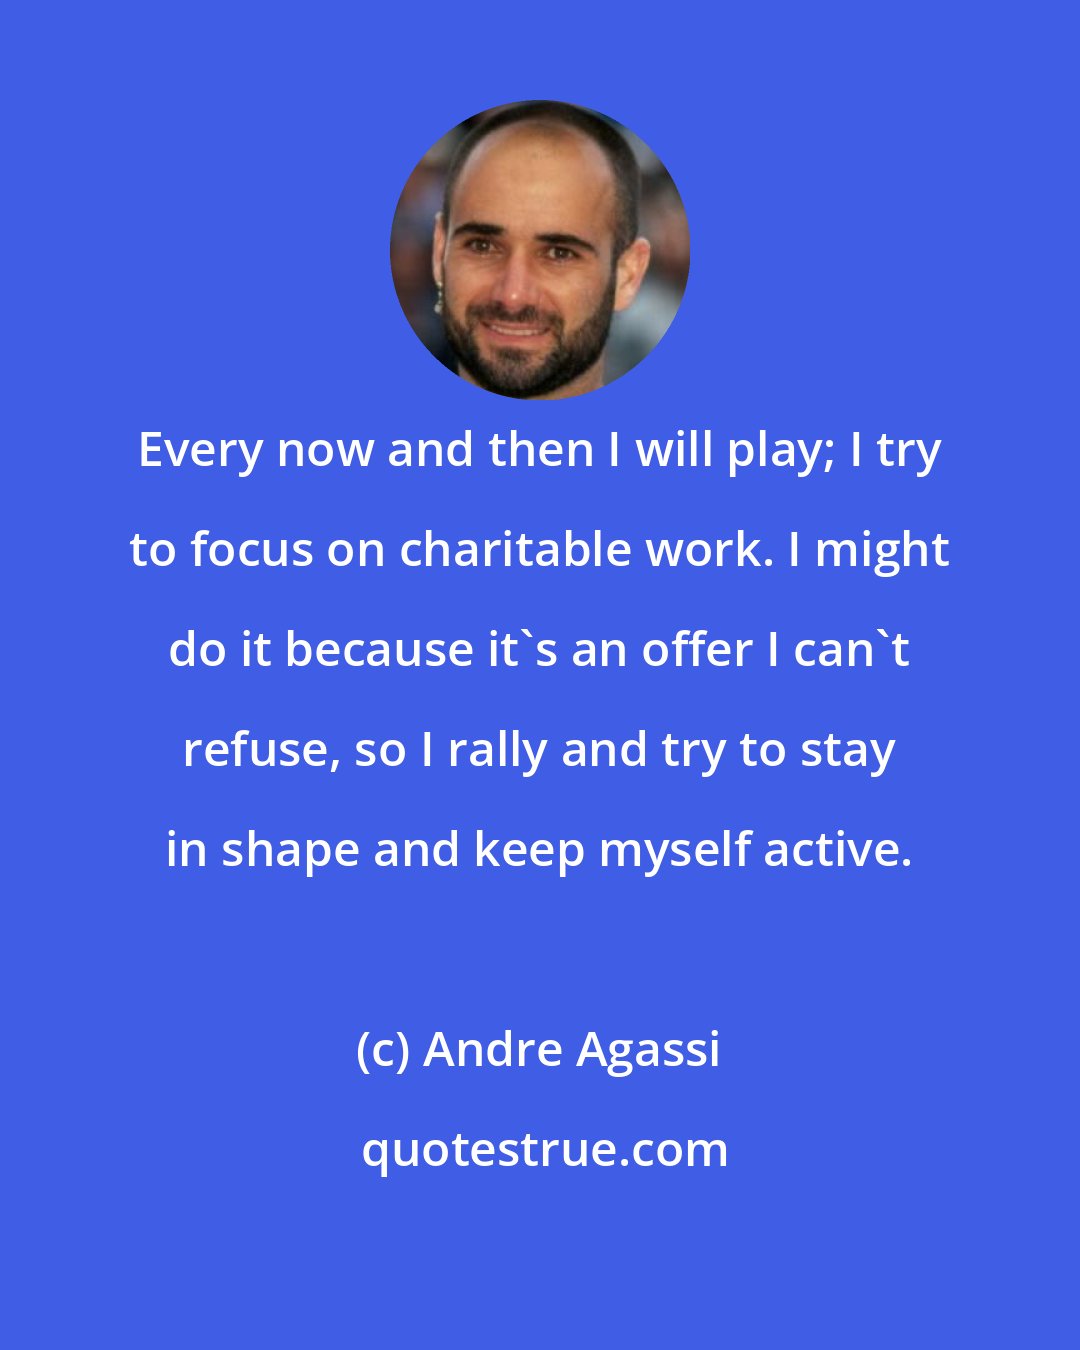 Andre Agassi: Every now and then I will play; I try to focus on charitable work. I might do it because it's an offer I can't refuse, so I rally and try to stay in shape and keep myself active.